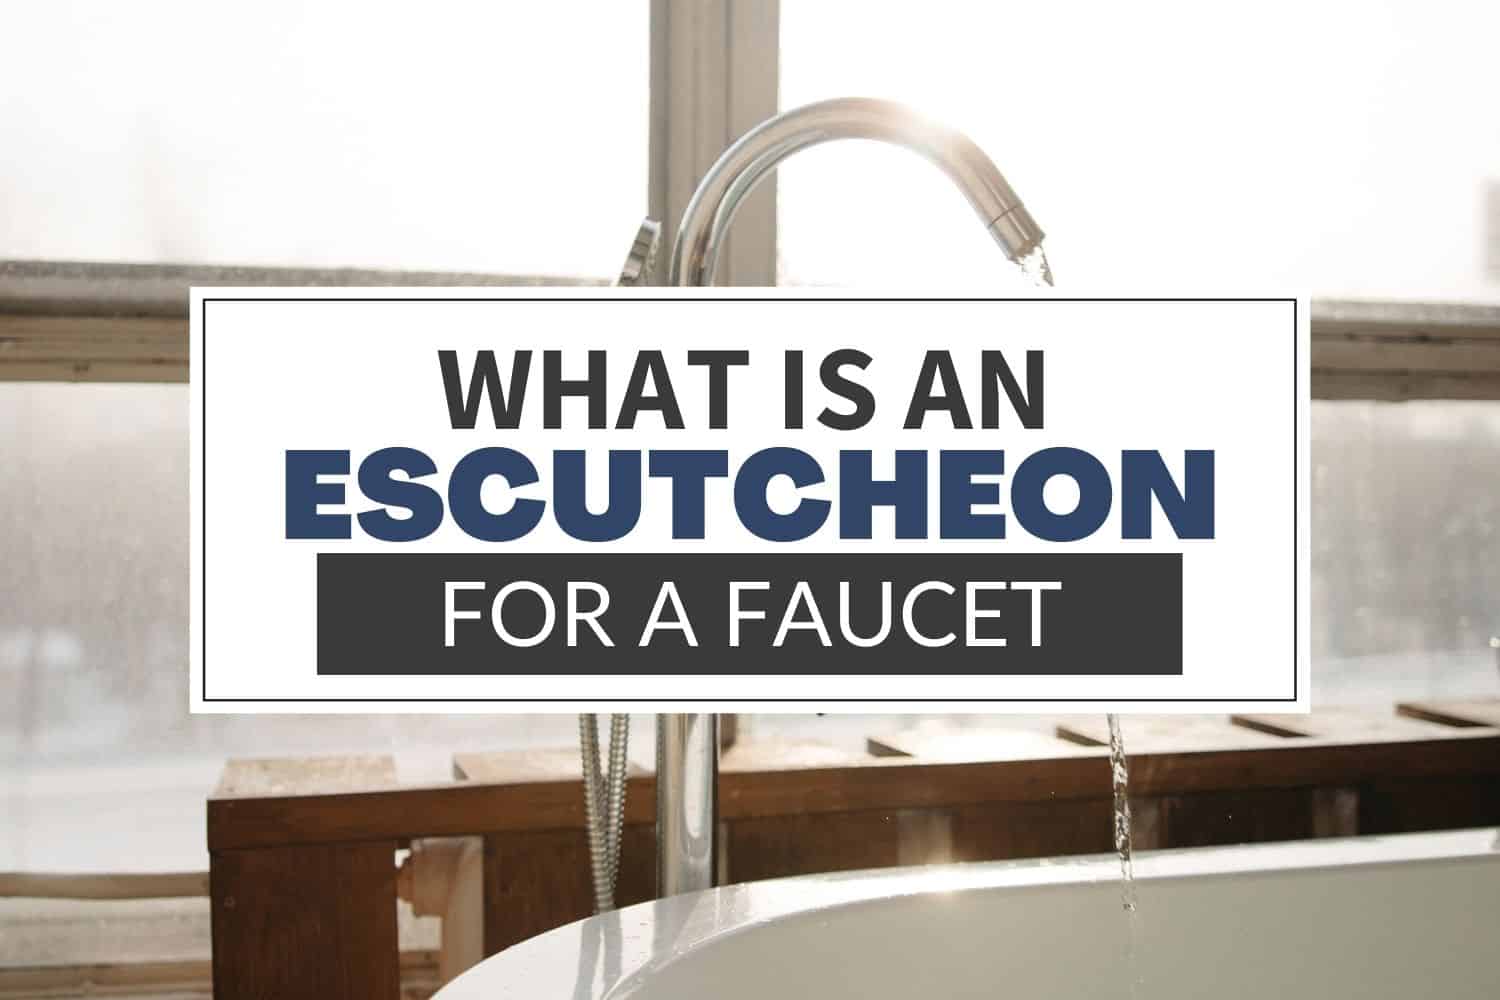 What is an escutcheon for a faucet